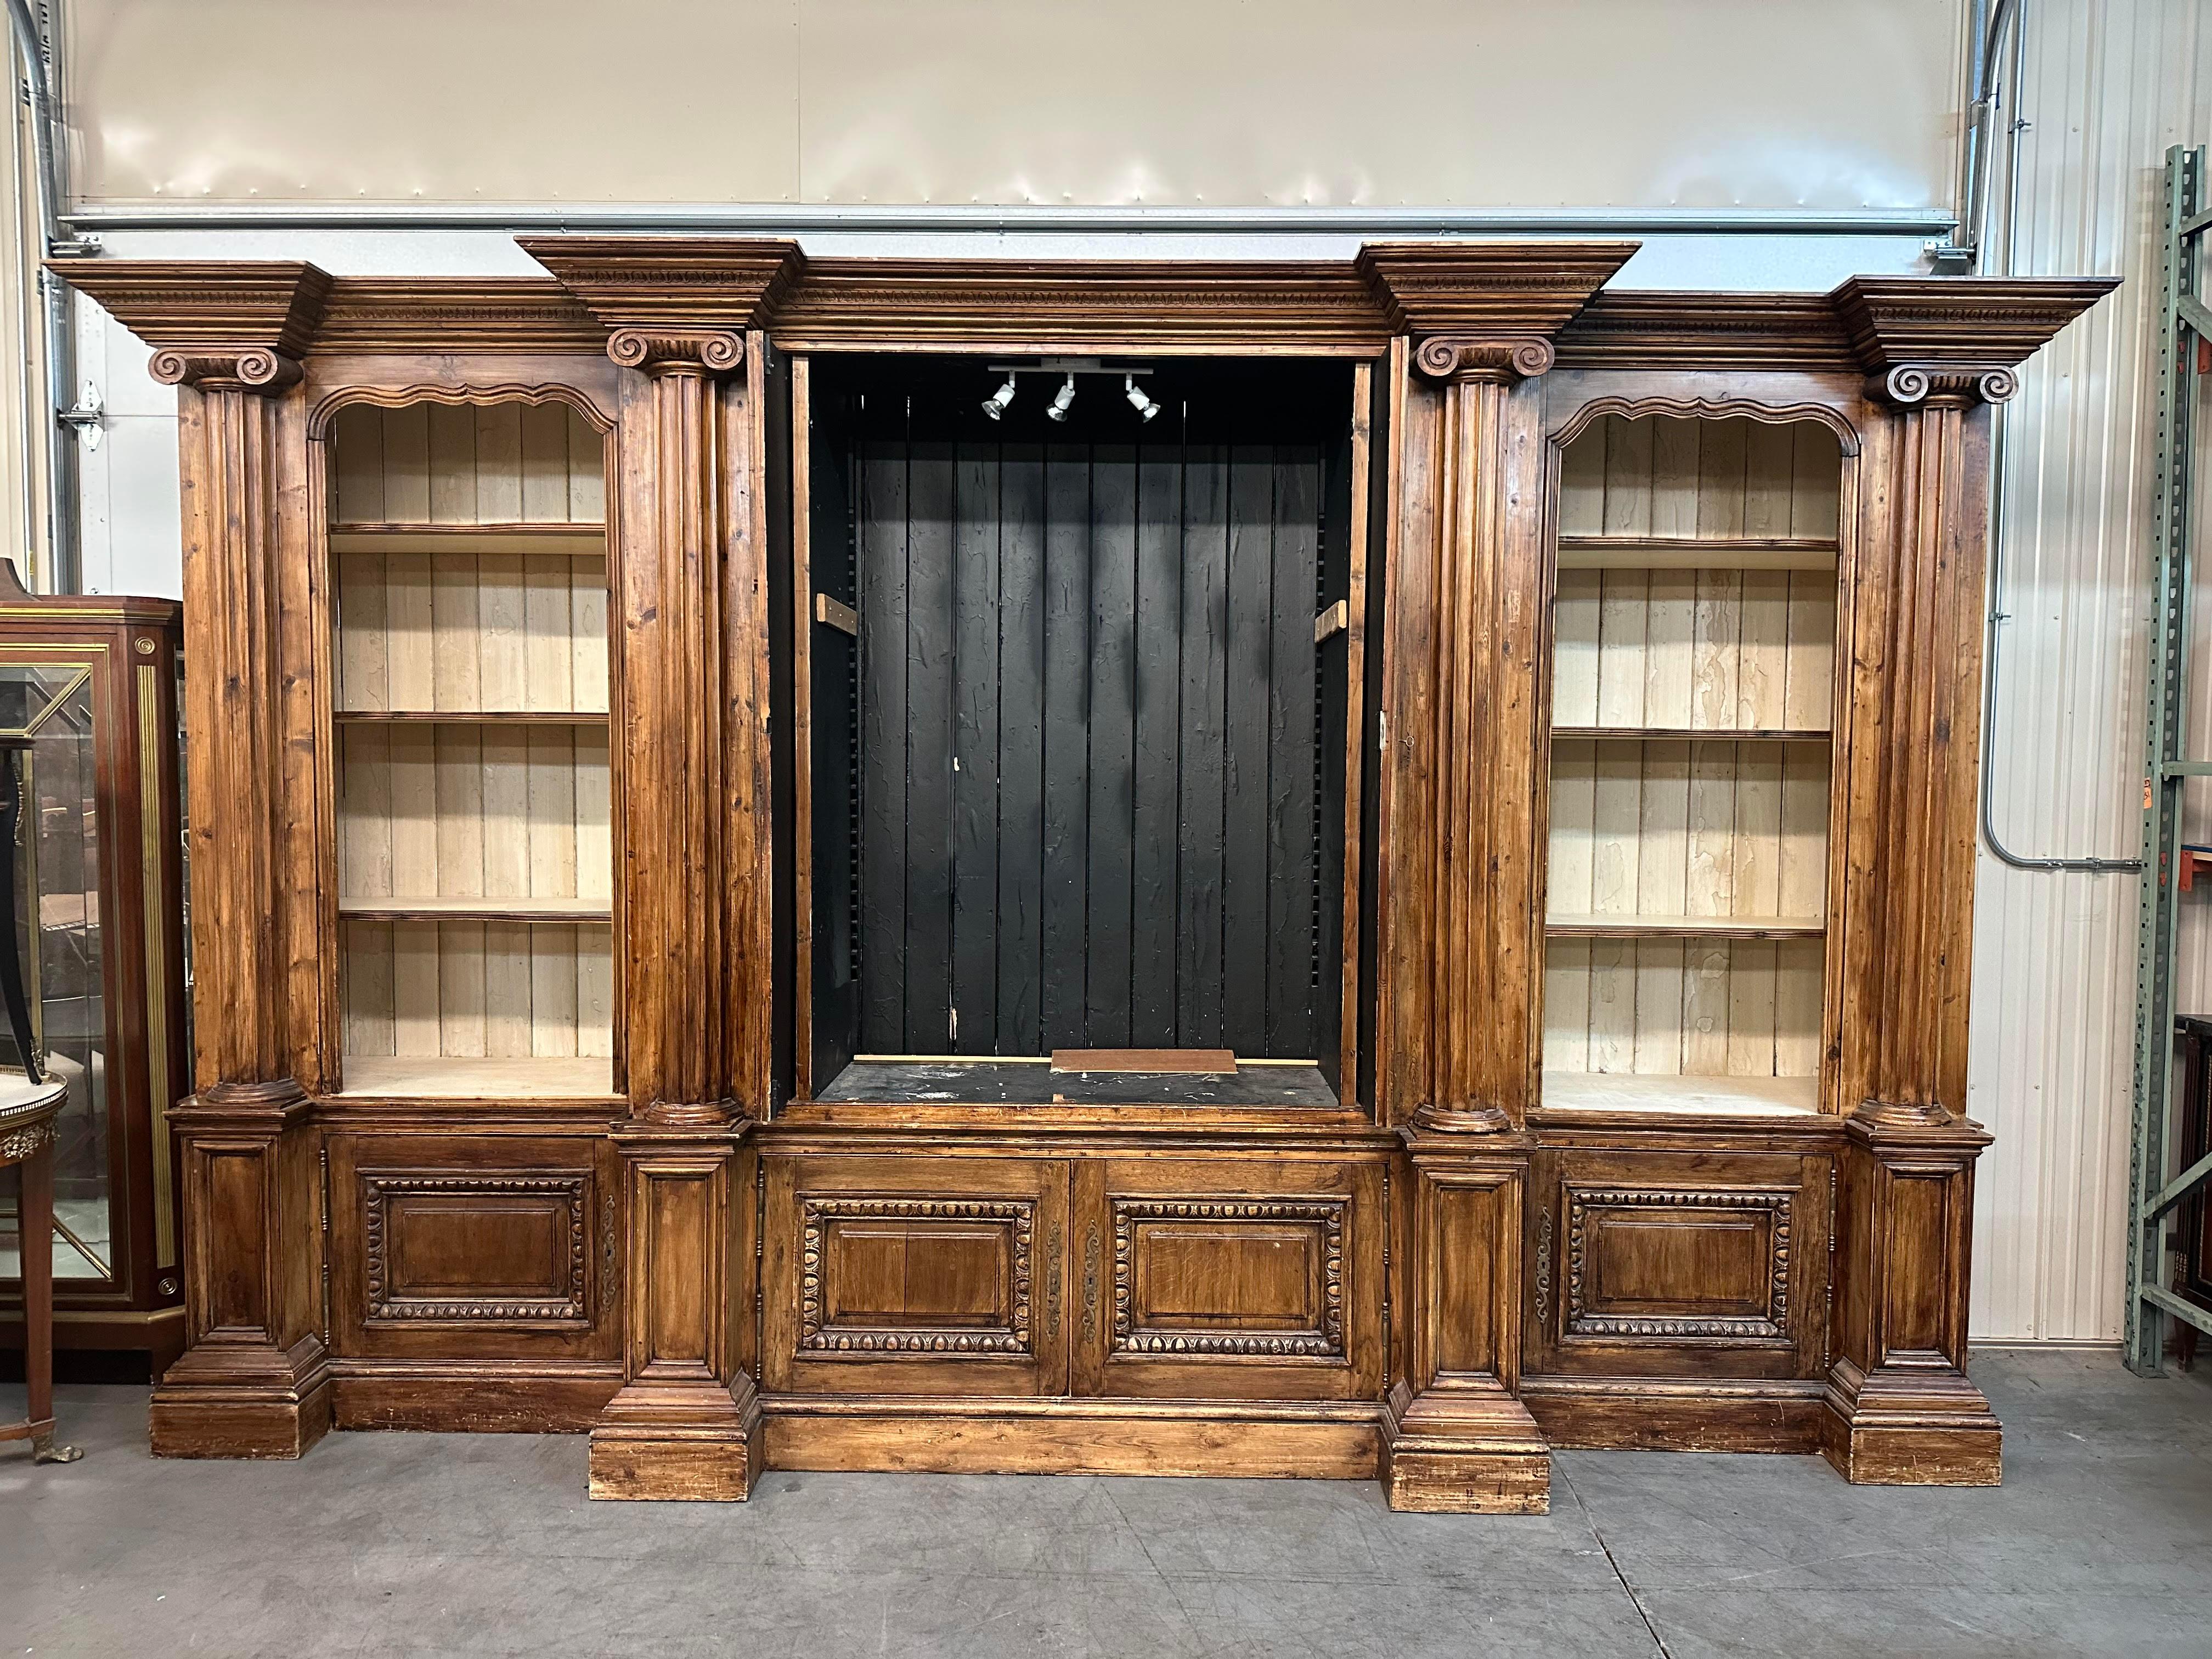 This is a very very unique and rare custom-made English piece. The piece is made of antique elements with all of the charm that antiques have and re-designed to act as an enormous bookcase or entertainment center in the modern age. The piece comes